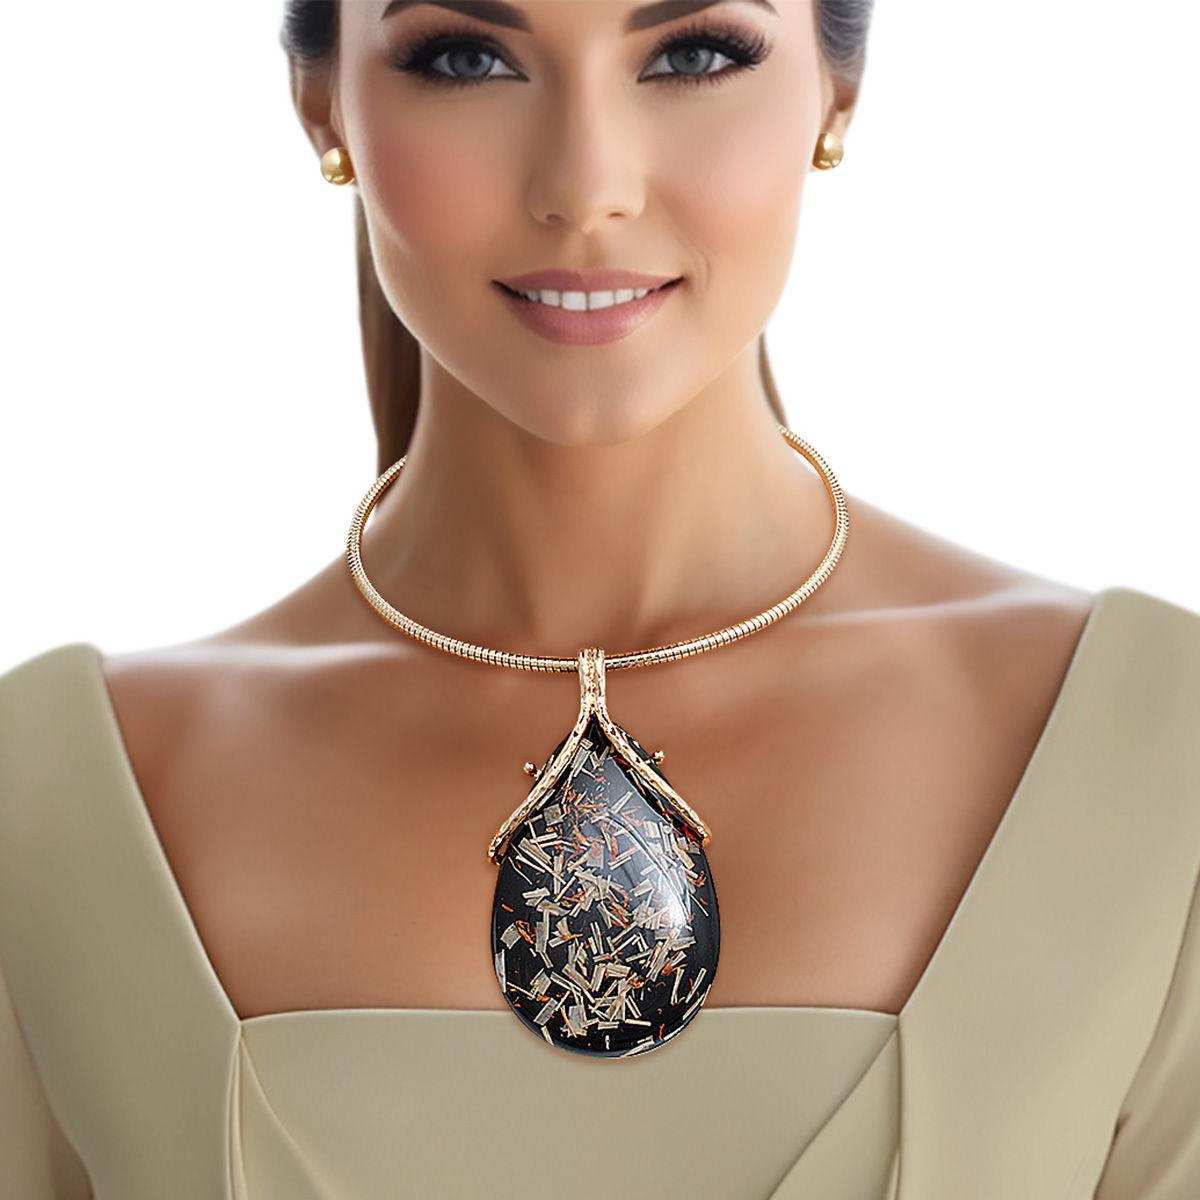 Fashion Necklace Set: Teardrop Black Resin Pendant with Dried Straw and Flower Elements